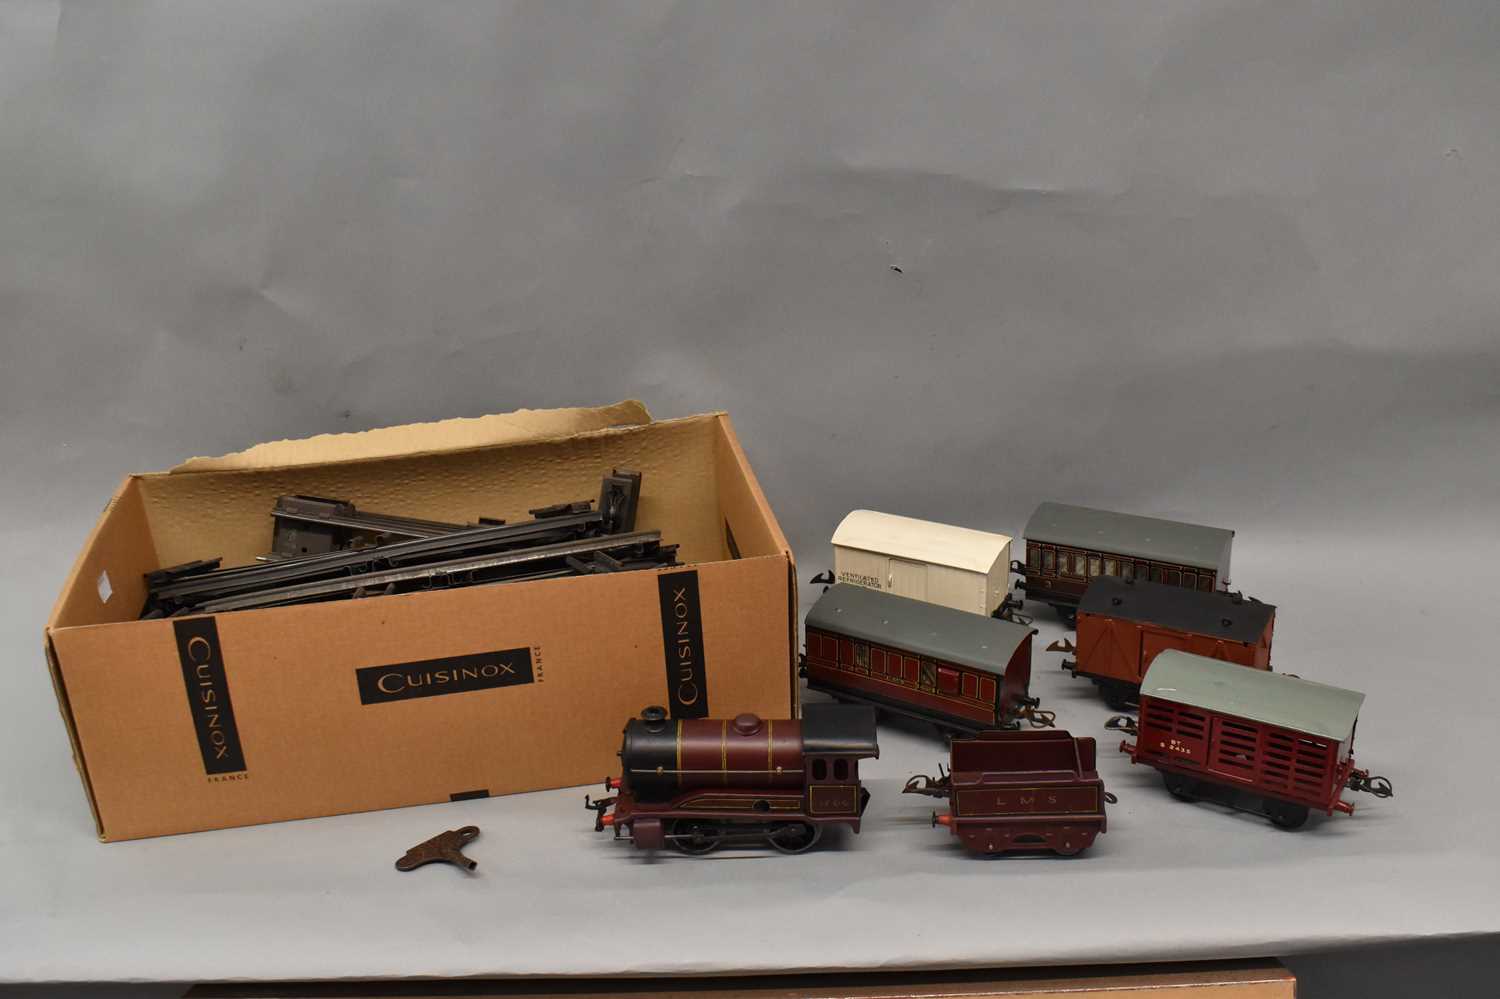 A Hornby OO gauge clockwork locomotive 5600, six assorted carriages/wagons, and a quantity of - Image 2 of 3